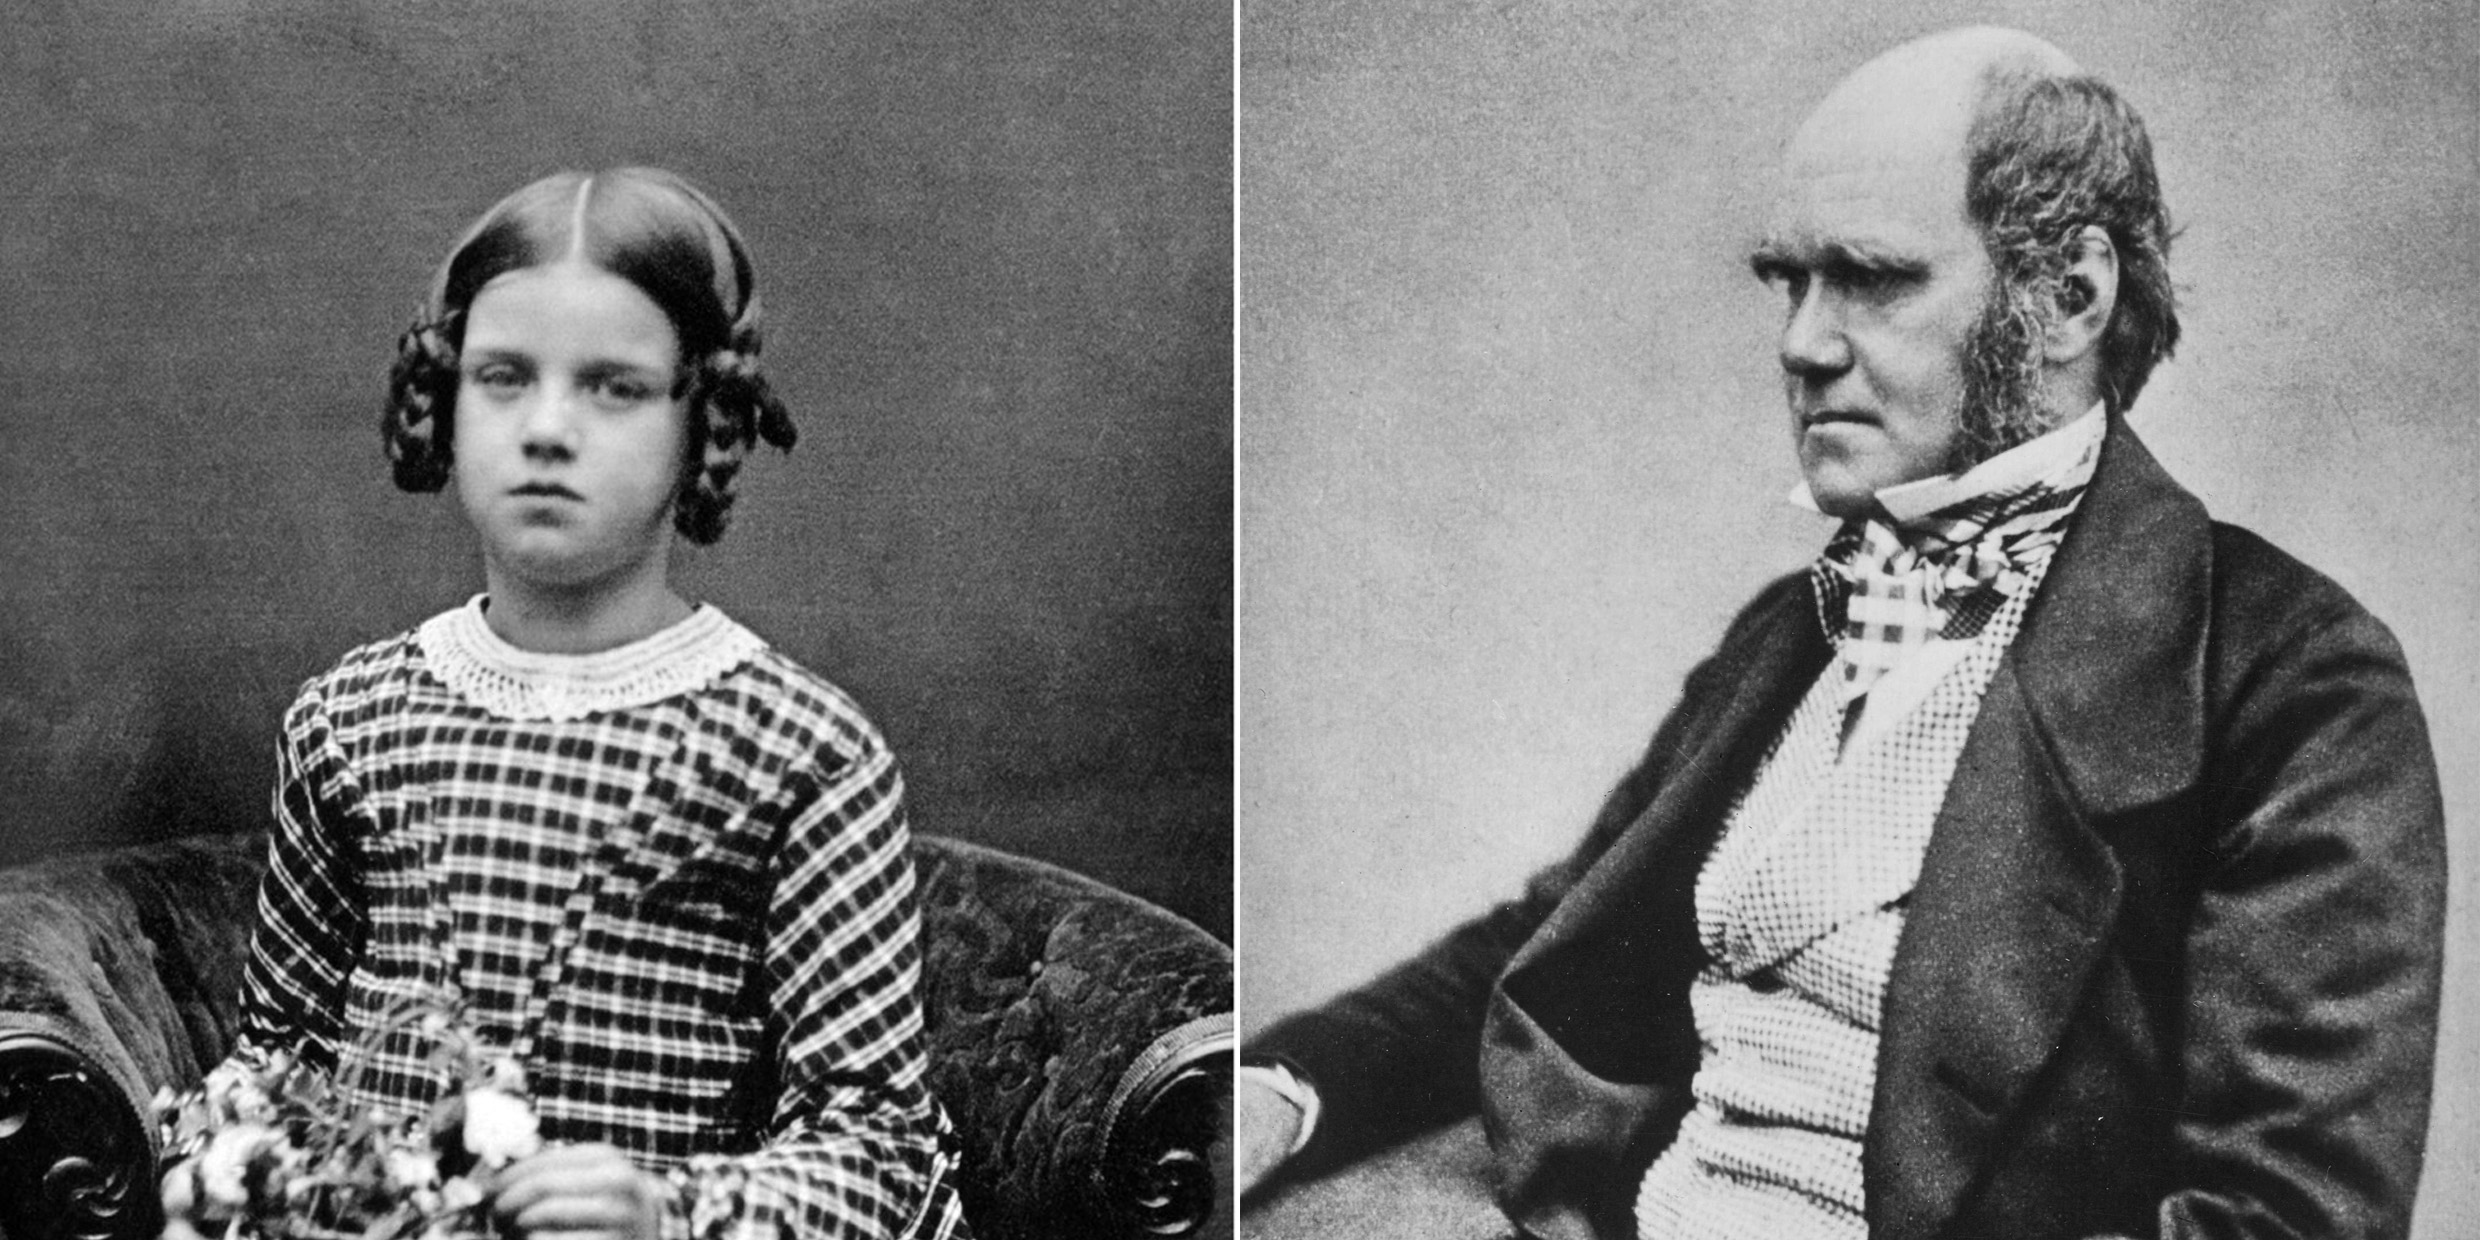 Black-and-white photographs of Annie Darwin and Charles Darwin